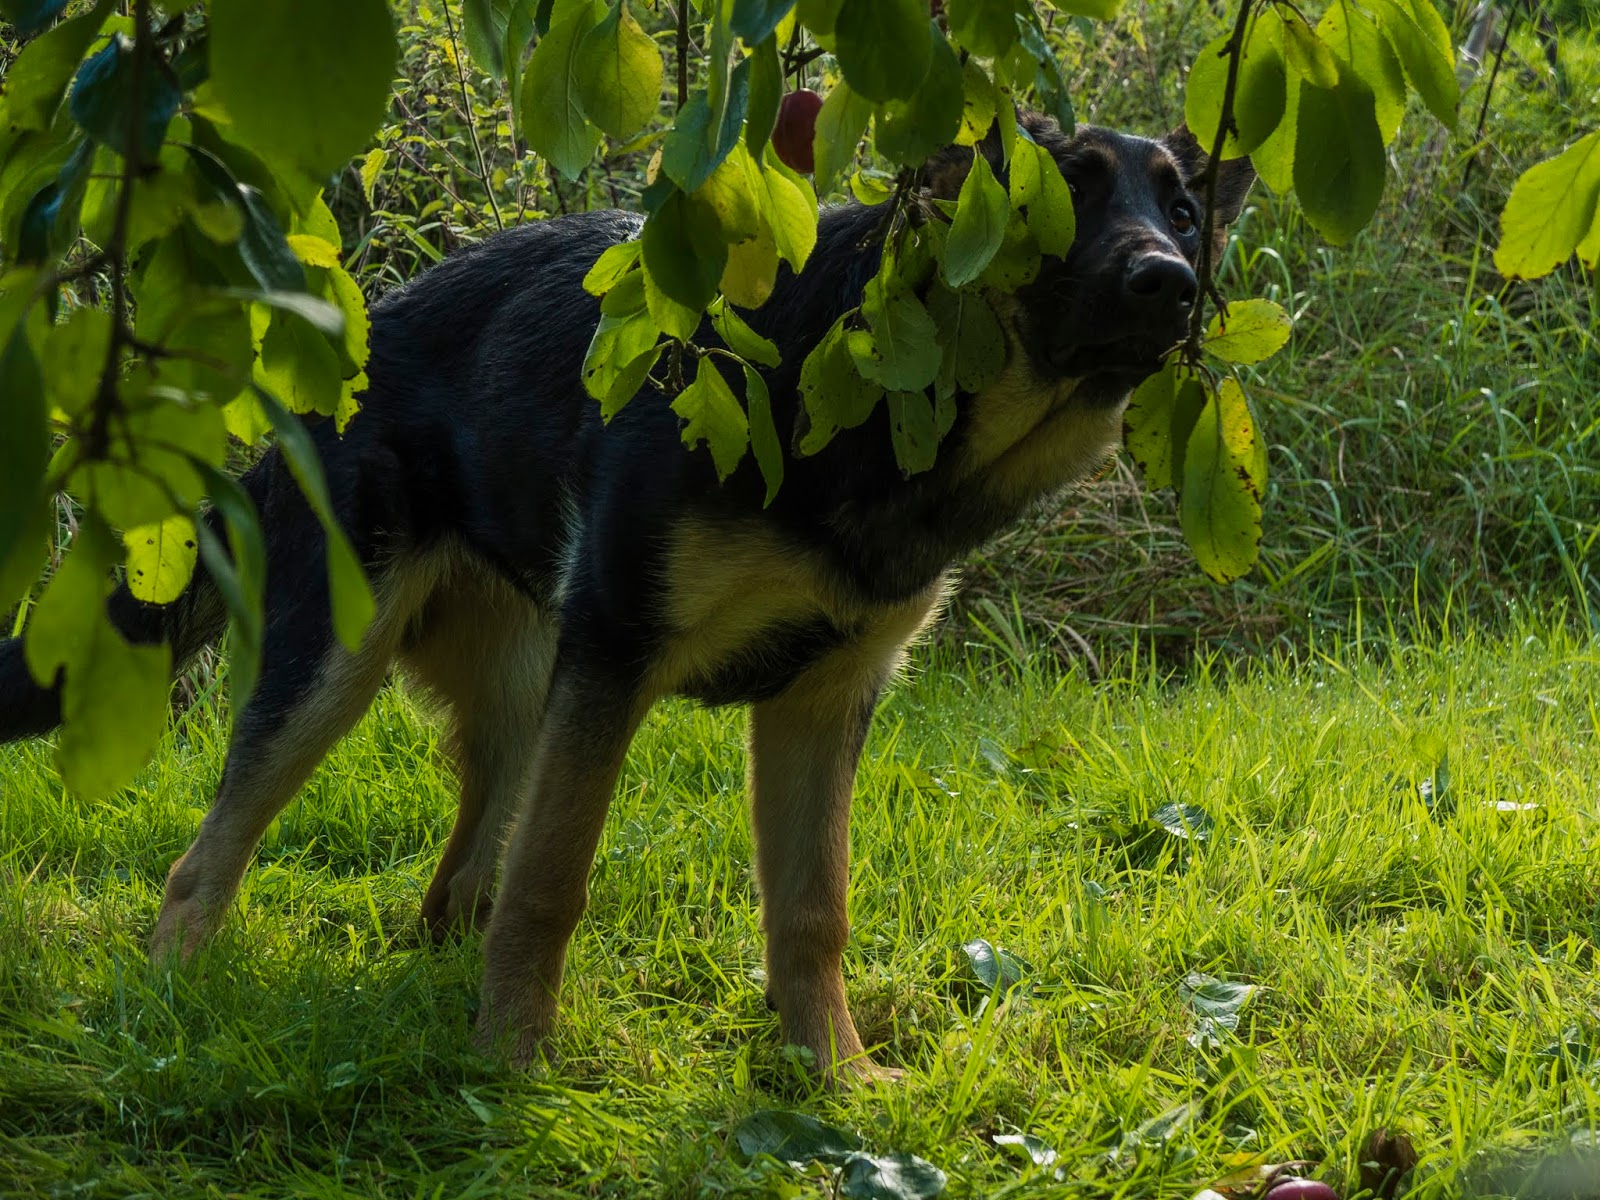 A German Shepherd puppy smelling a plum tree branch and looking for fruit.